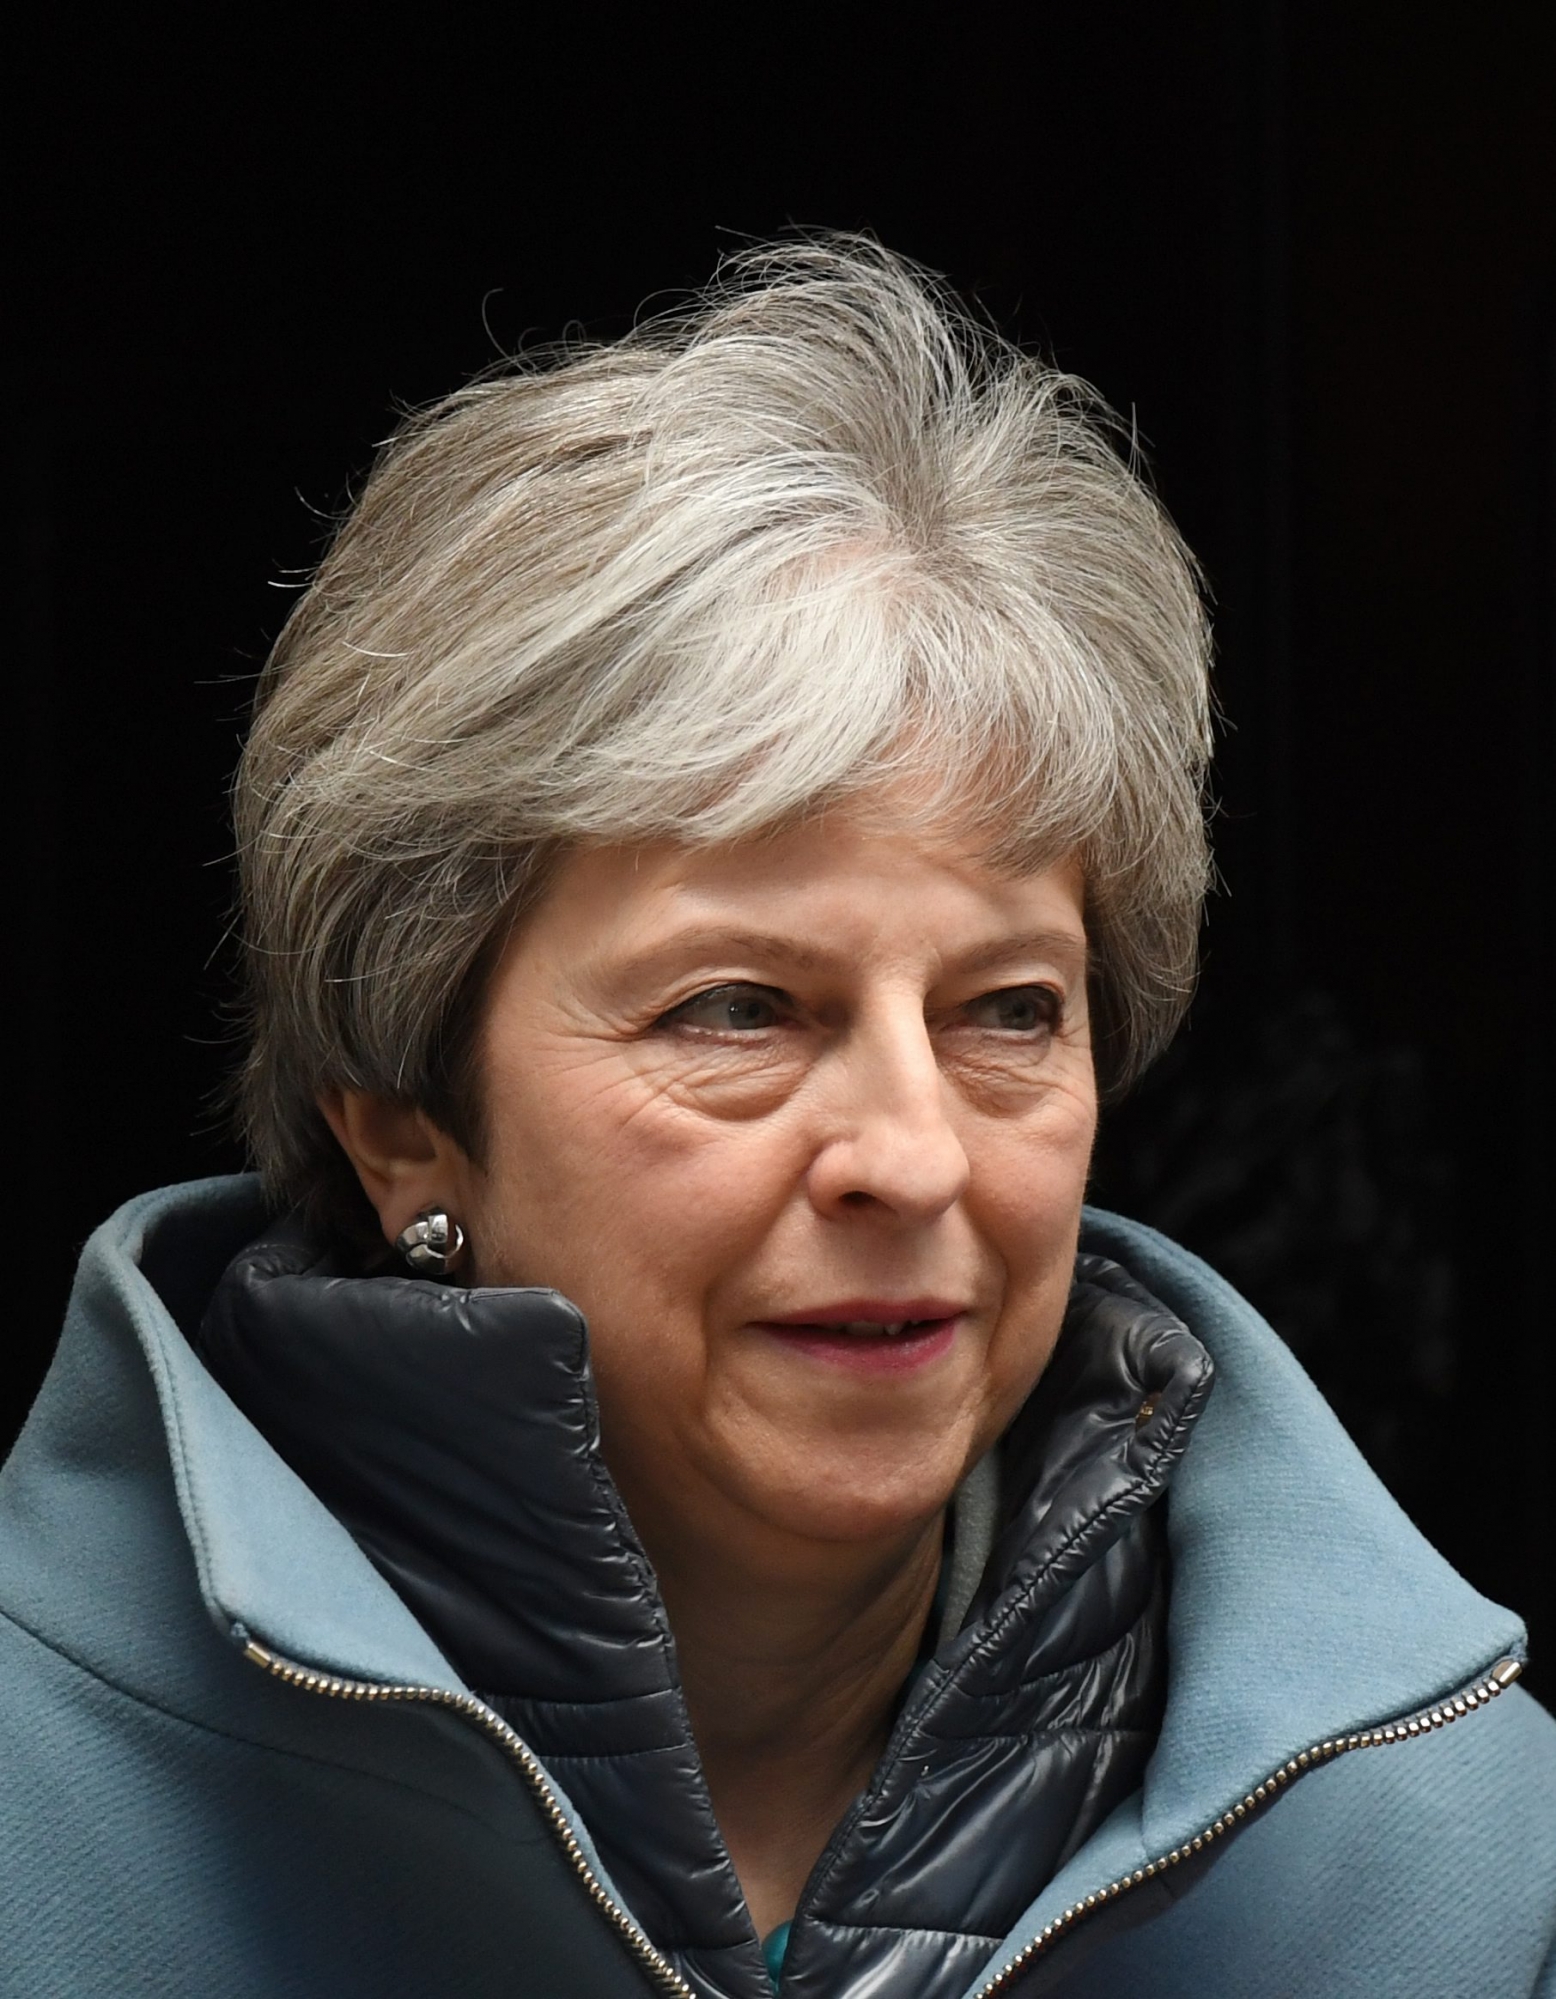 epa07462590 British Prime Minister, Theresa May leaves 10 Downing street to give a statement in the Houses of Parliament in London, Britain, 25 March 2019. Reports state that Theresa May updated ministers on her Brexit strategy at a meeting of her cabinet earlier in the day which comes as the EU announced that its preparation for a no-deal scenario has been completed.  EPA/FACUNDO ARRIZABALAGA BRITAIN POLITICS BREXIT